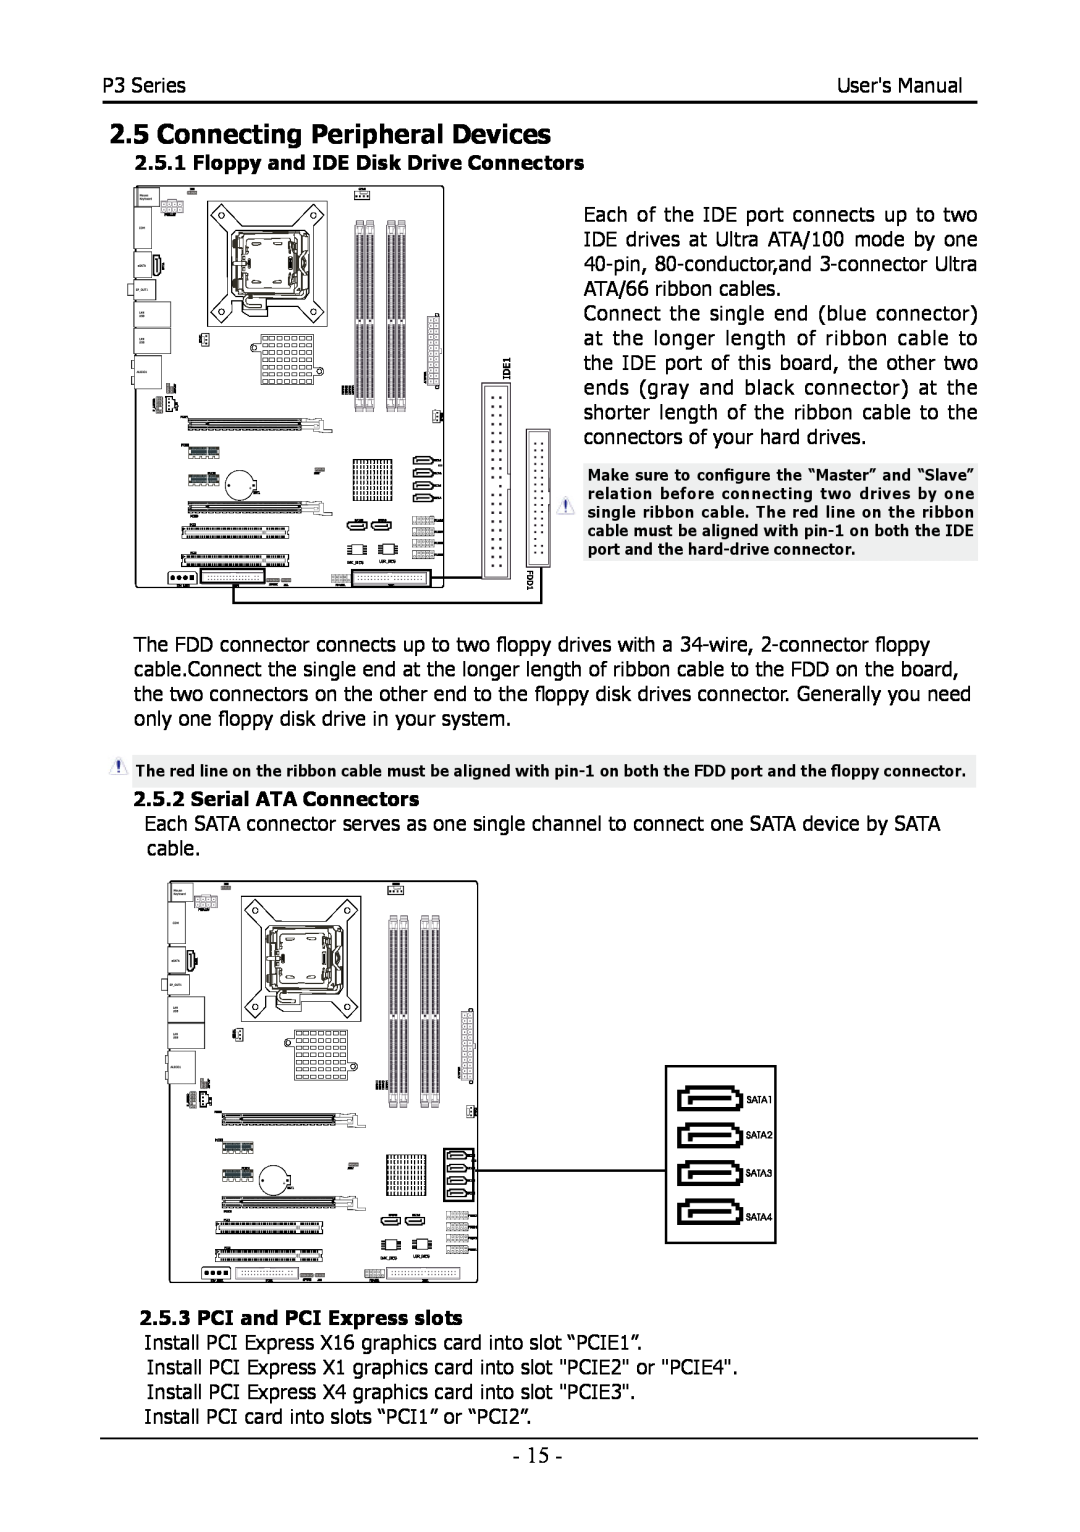 Intel 88ENEP3S00 user manual Connecting Peripheral Devices, Floppy and IDE Disk Drive Connectors, Serial ATA Connectors 